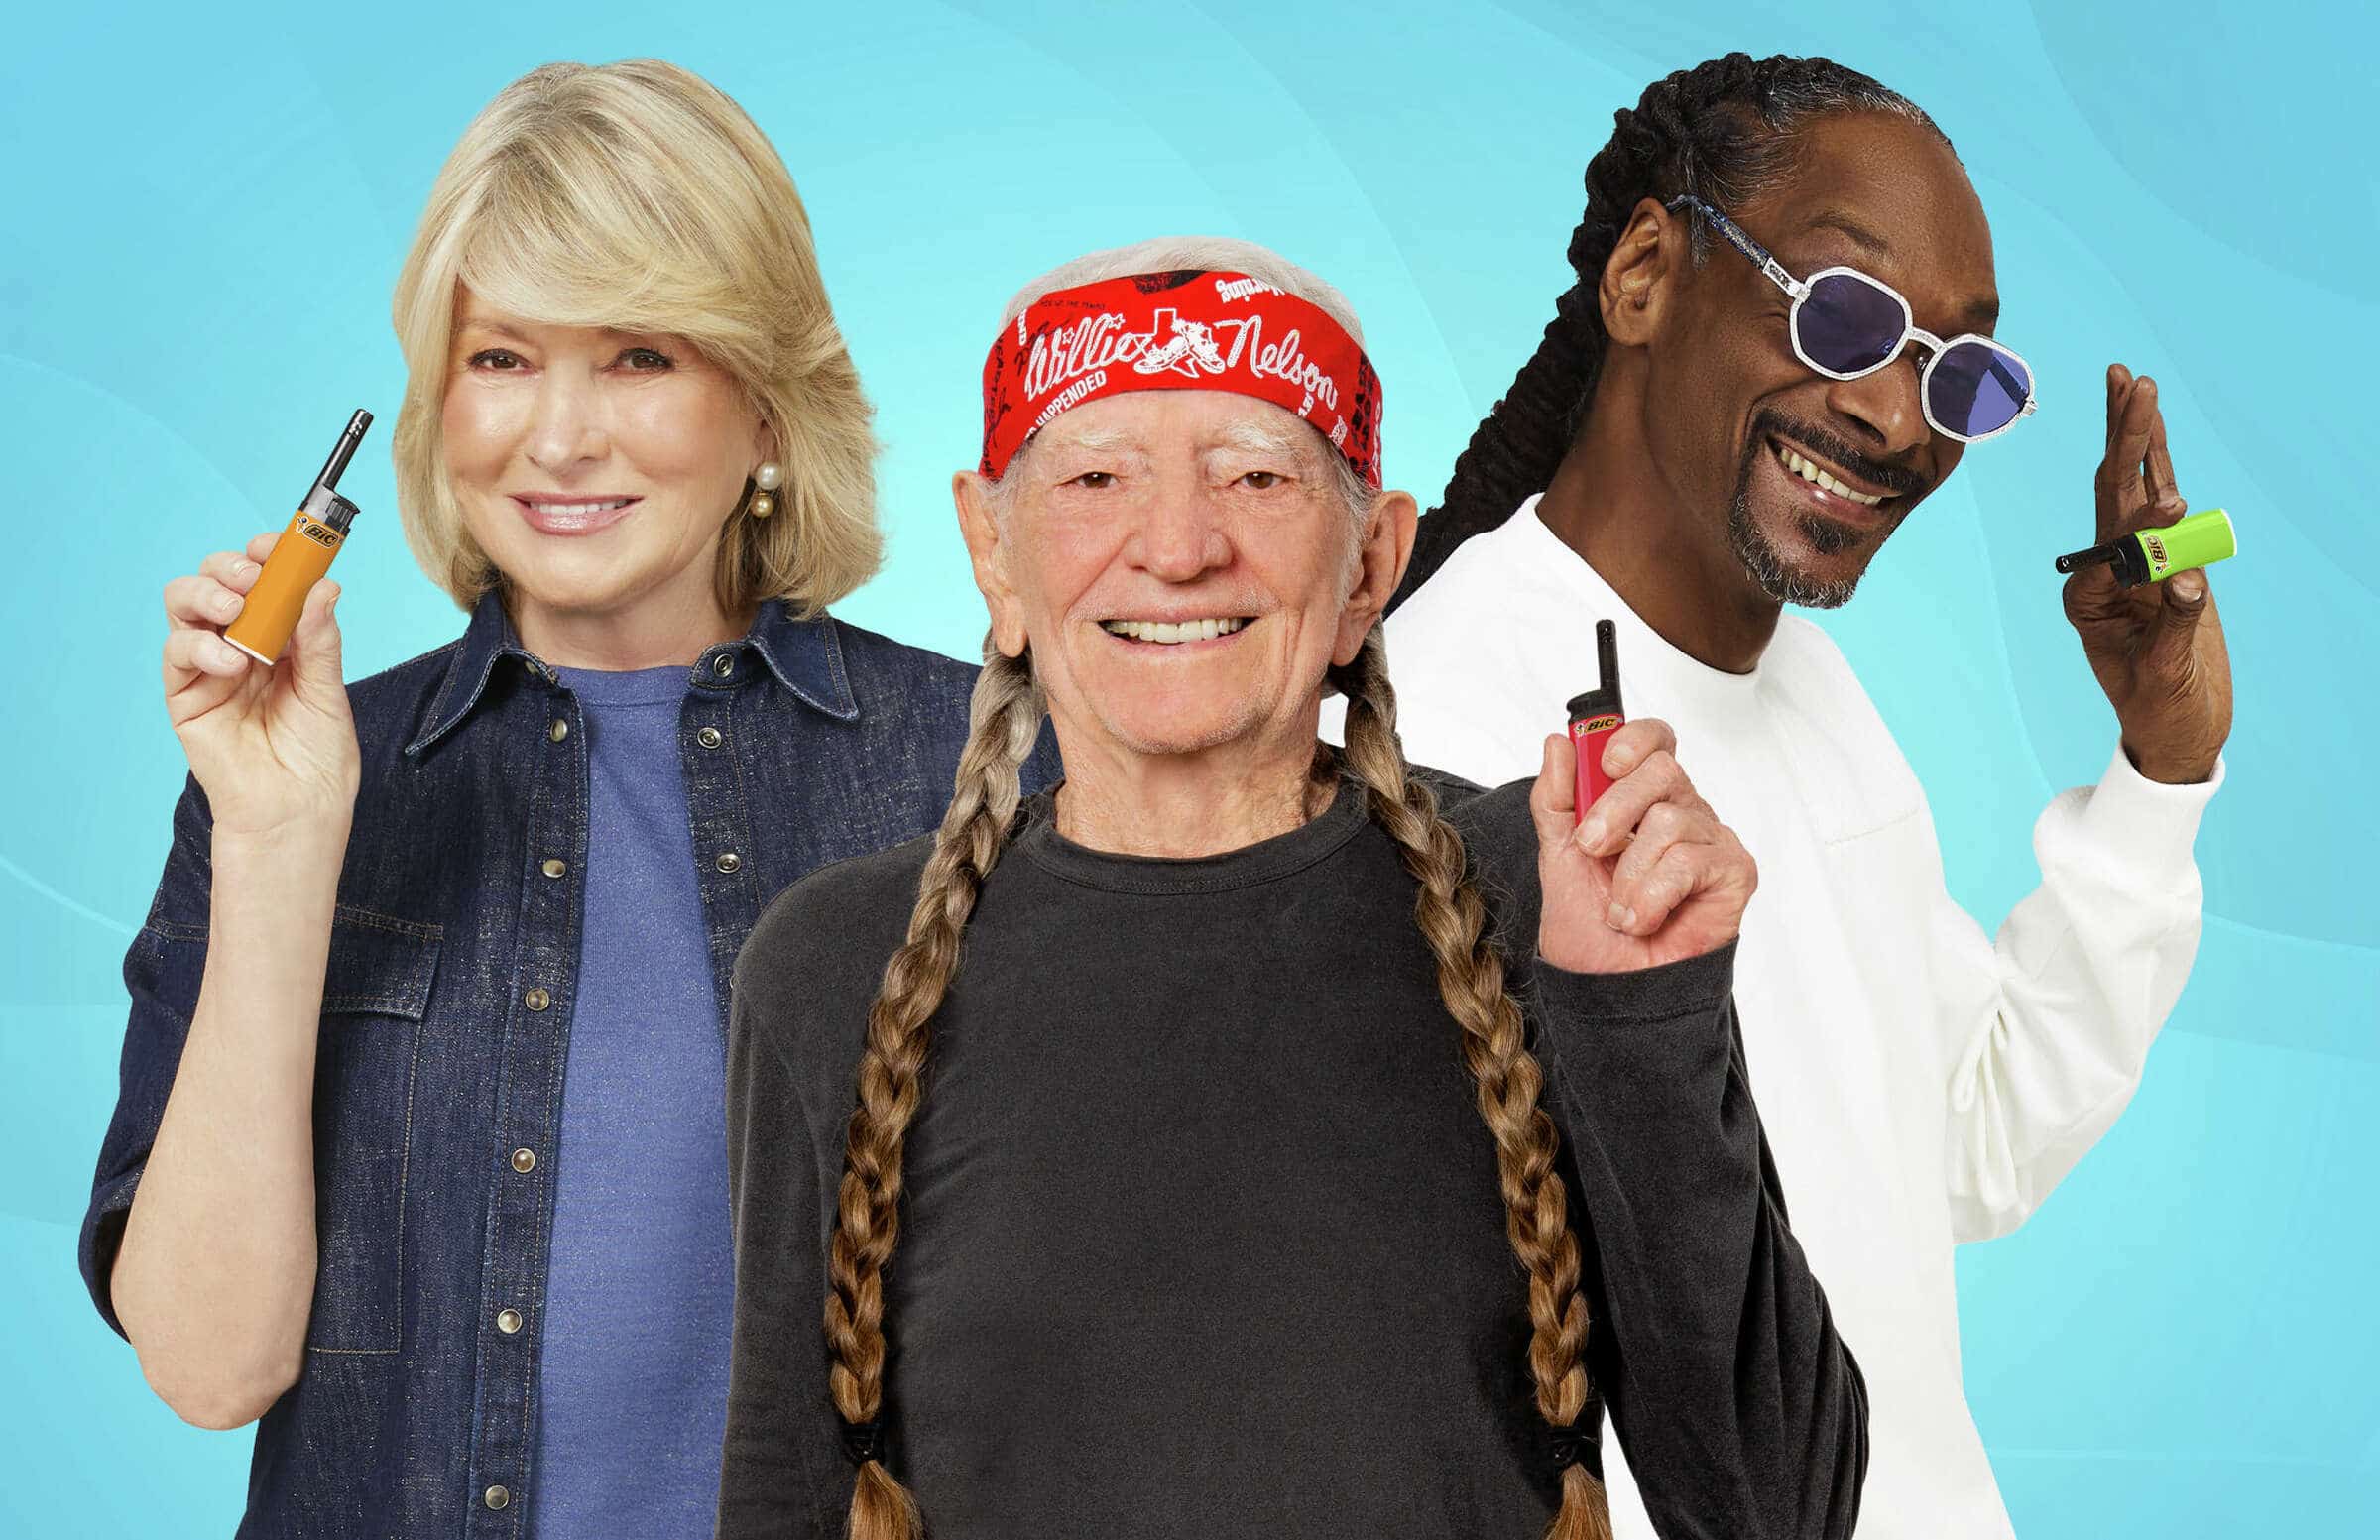 Martha Stewart, Willie Nelson, & Snoop Dogg for BIC's new campaign.